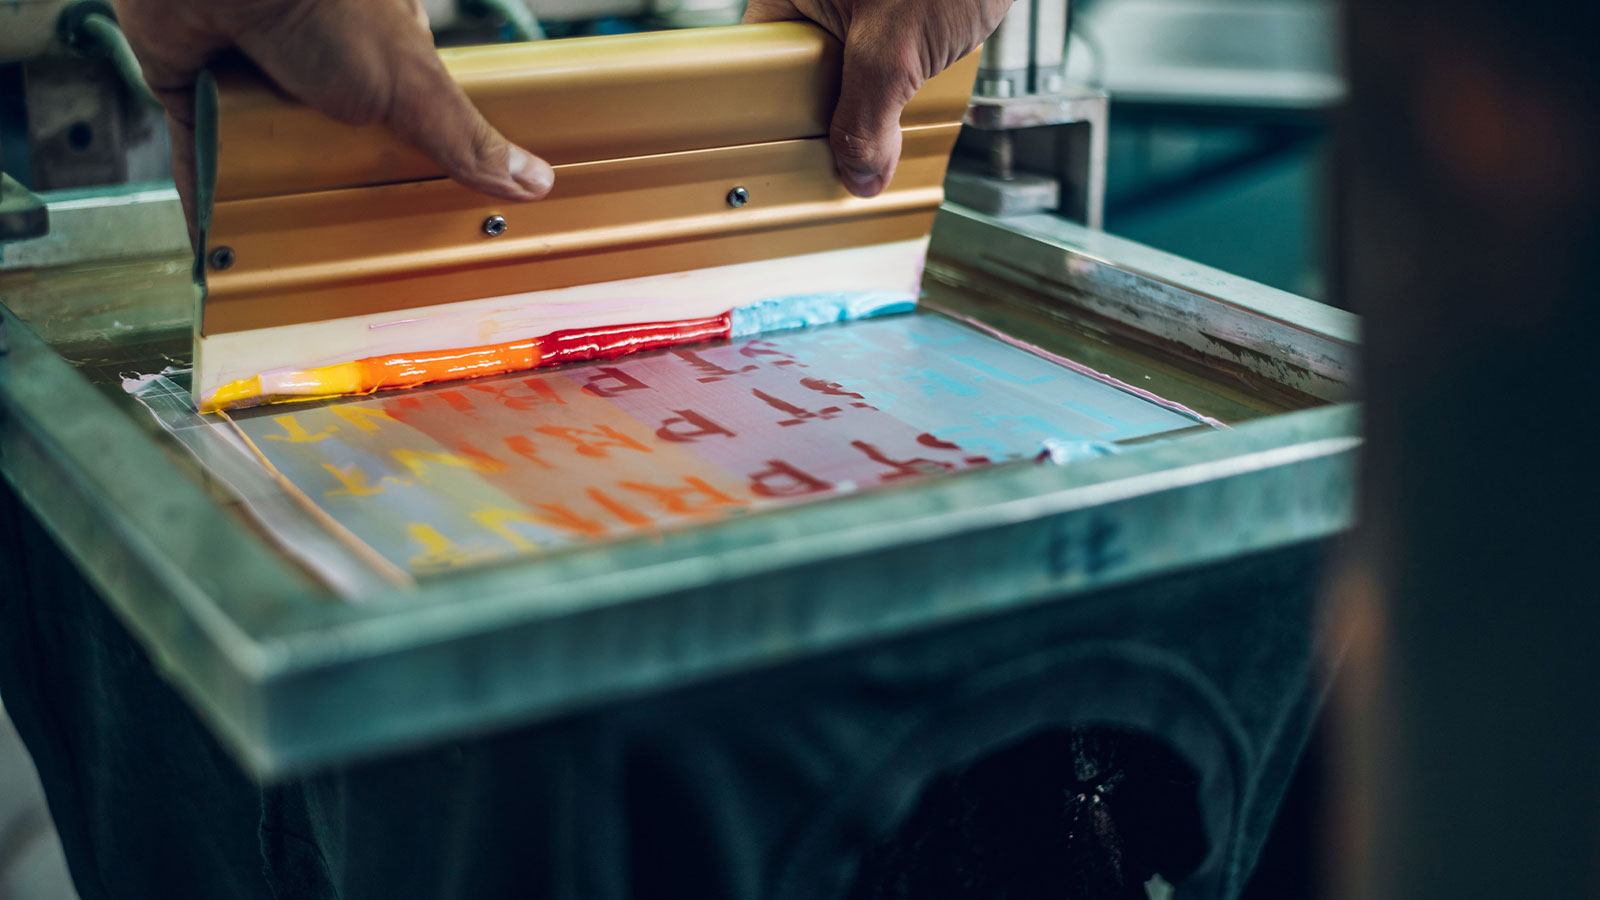 Screen Printing Services Amherst, NY | Custom Apparel | Screen Printed Shirts, Hats, Hoodies, & More Near Amherst